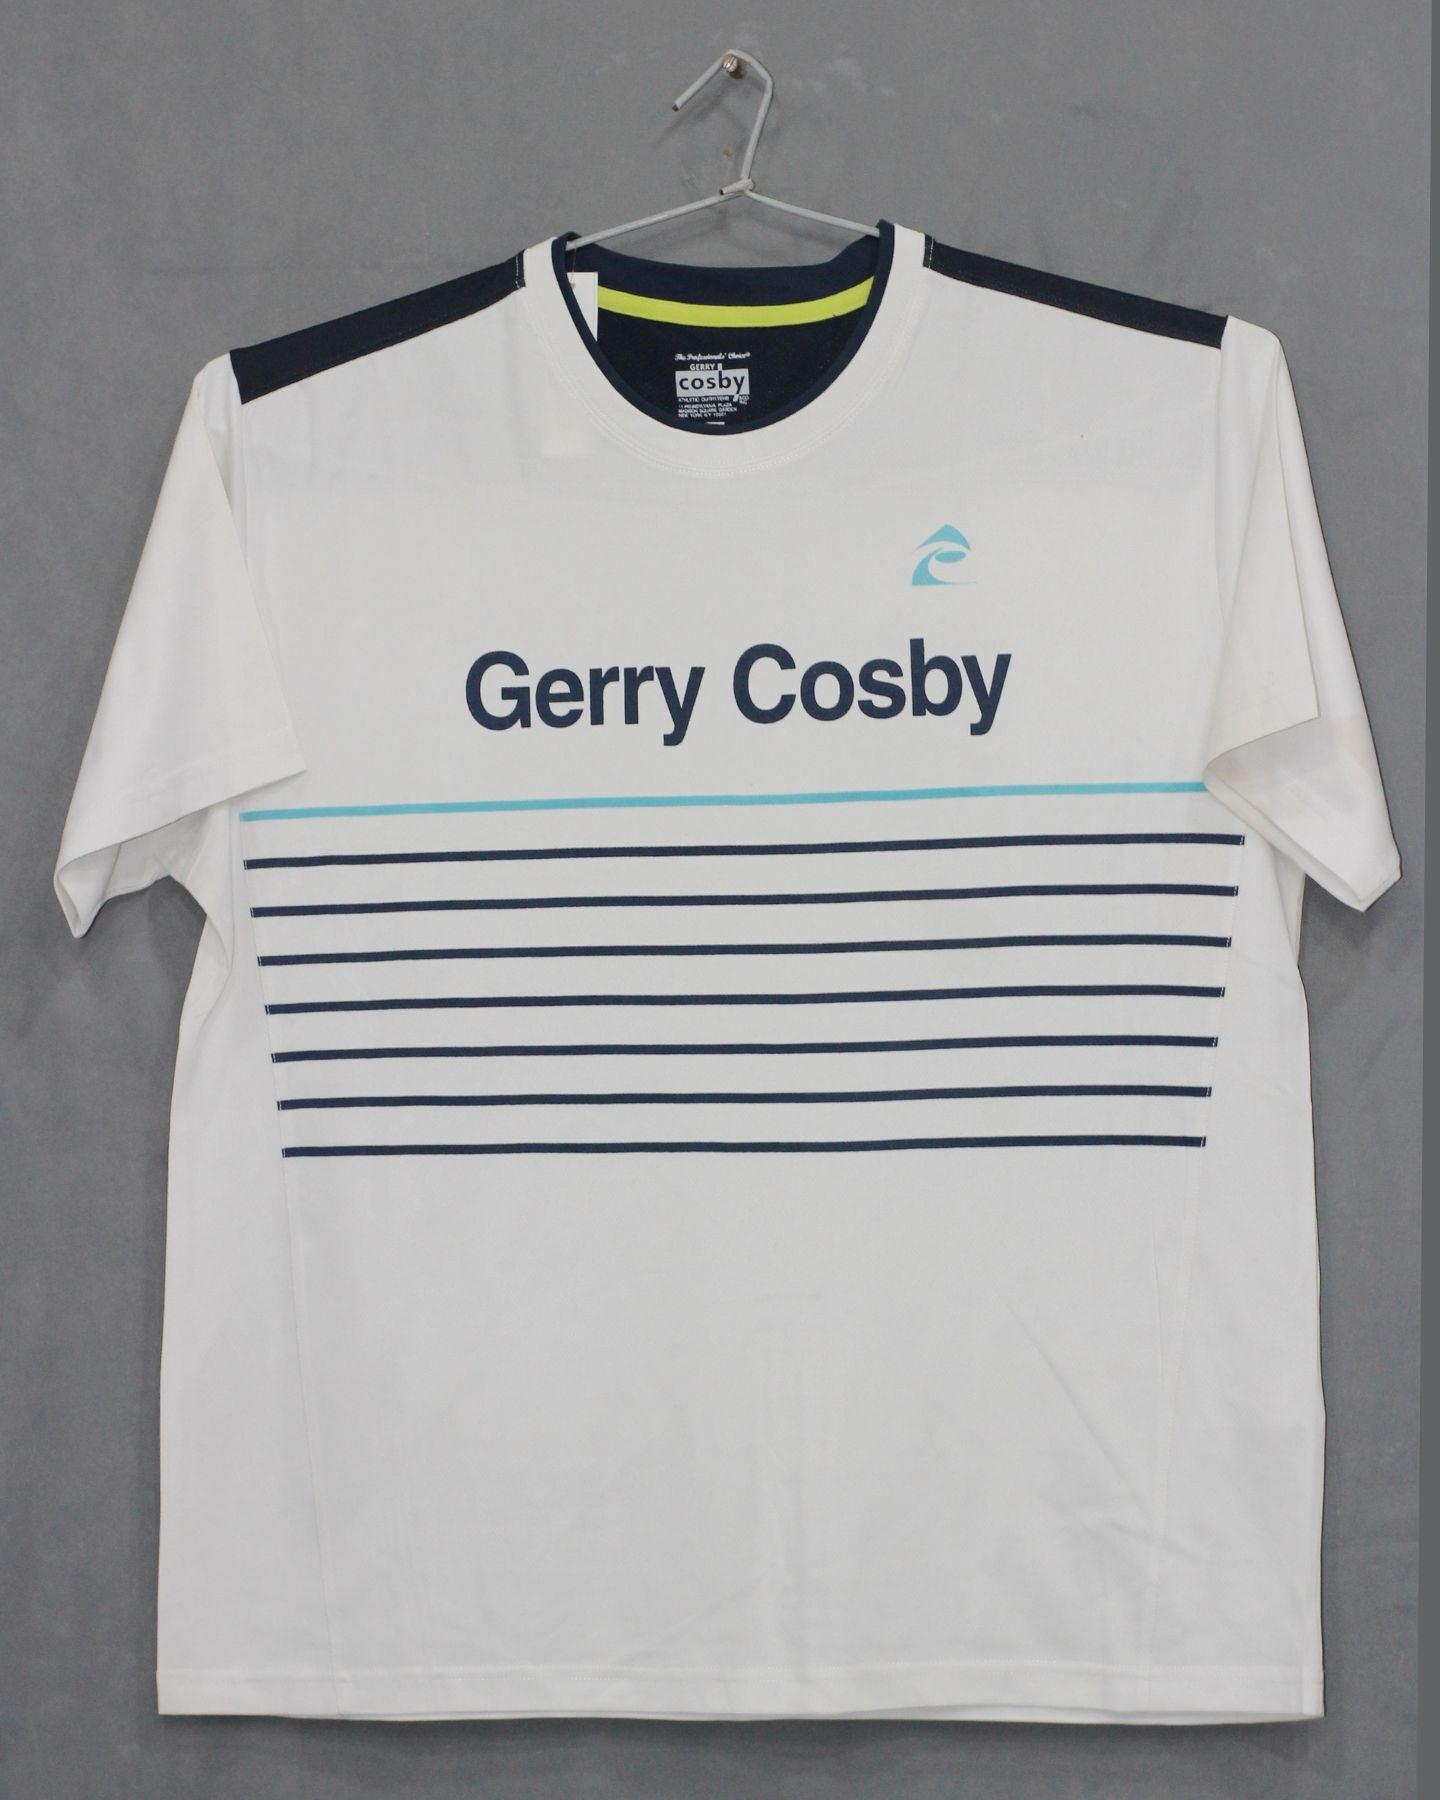 Gerry Cosby & Co Branded Original For Sports Round Neck Men T Shirt